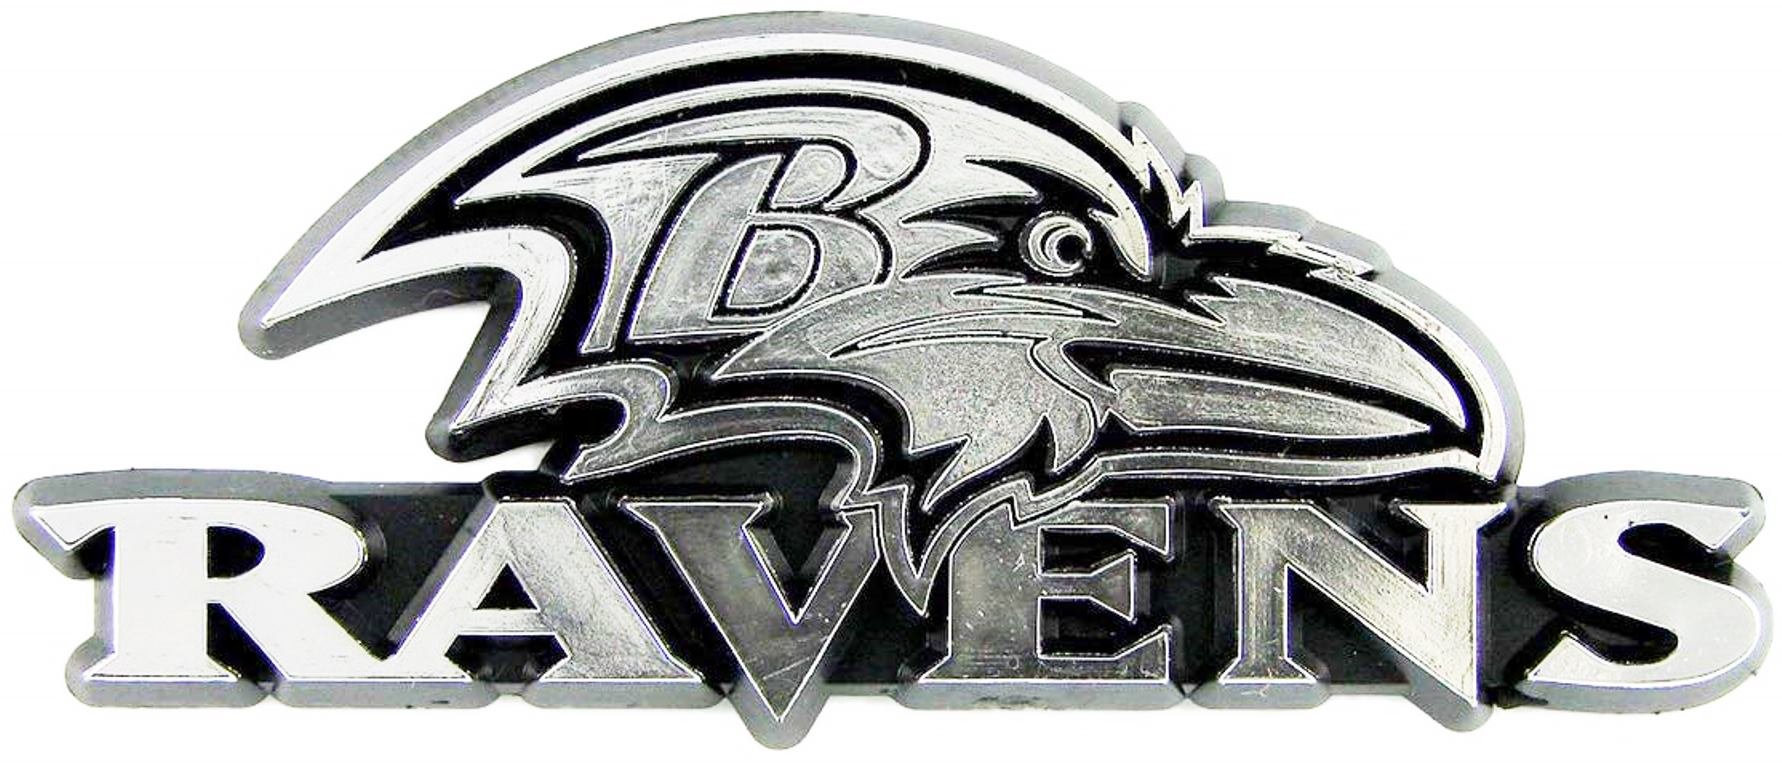 Baltimore Ravens Auto Emblem, Silver Chrome Color, Raised Molded Plastic, 3.5 Inch, Adhesive Tape Backing